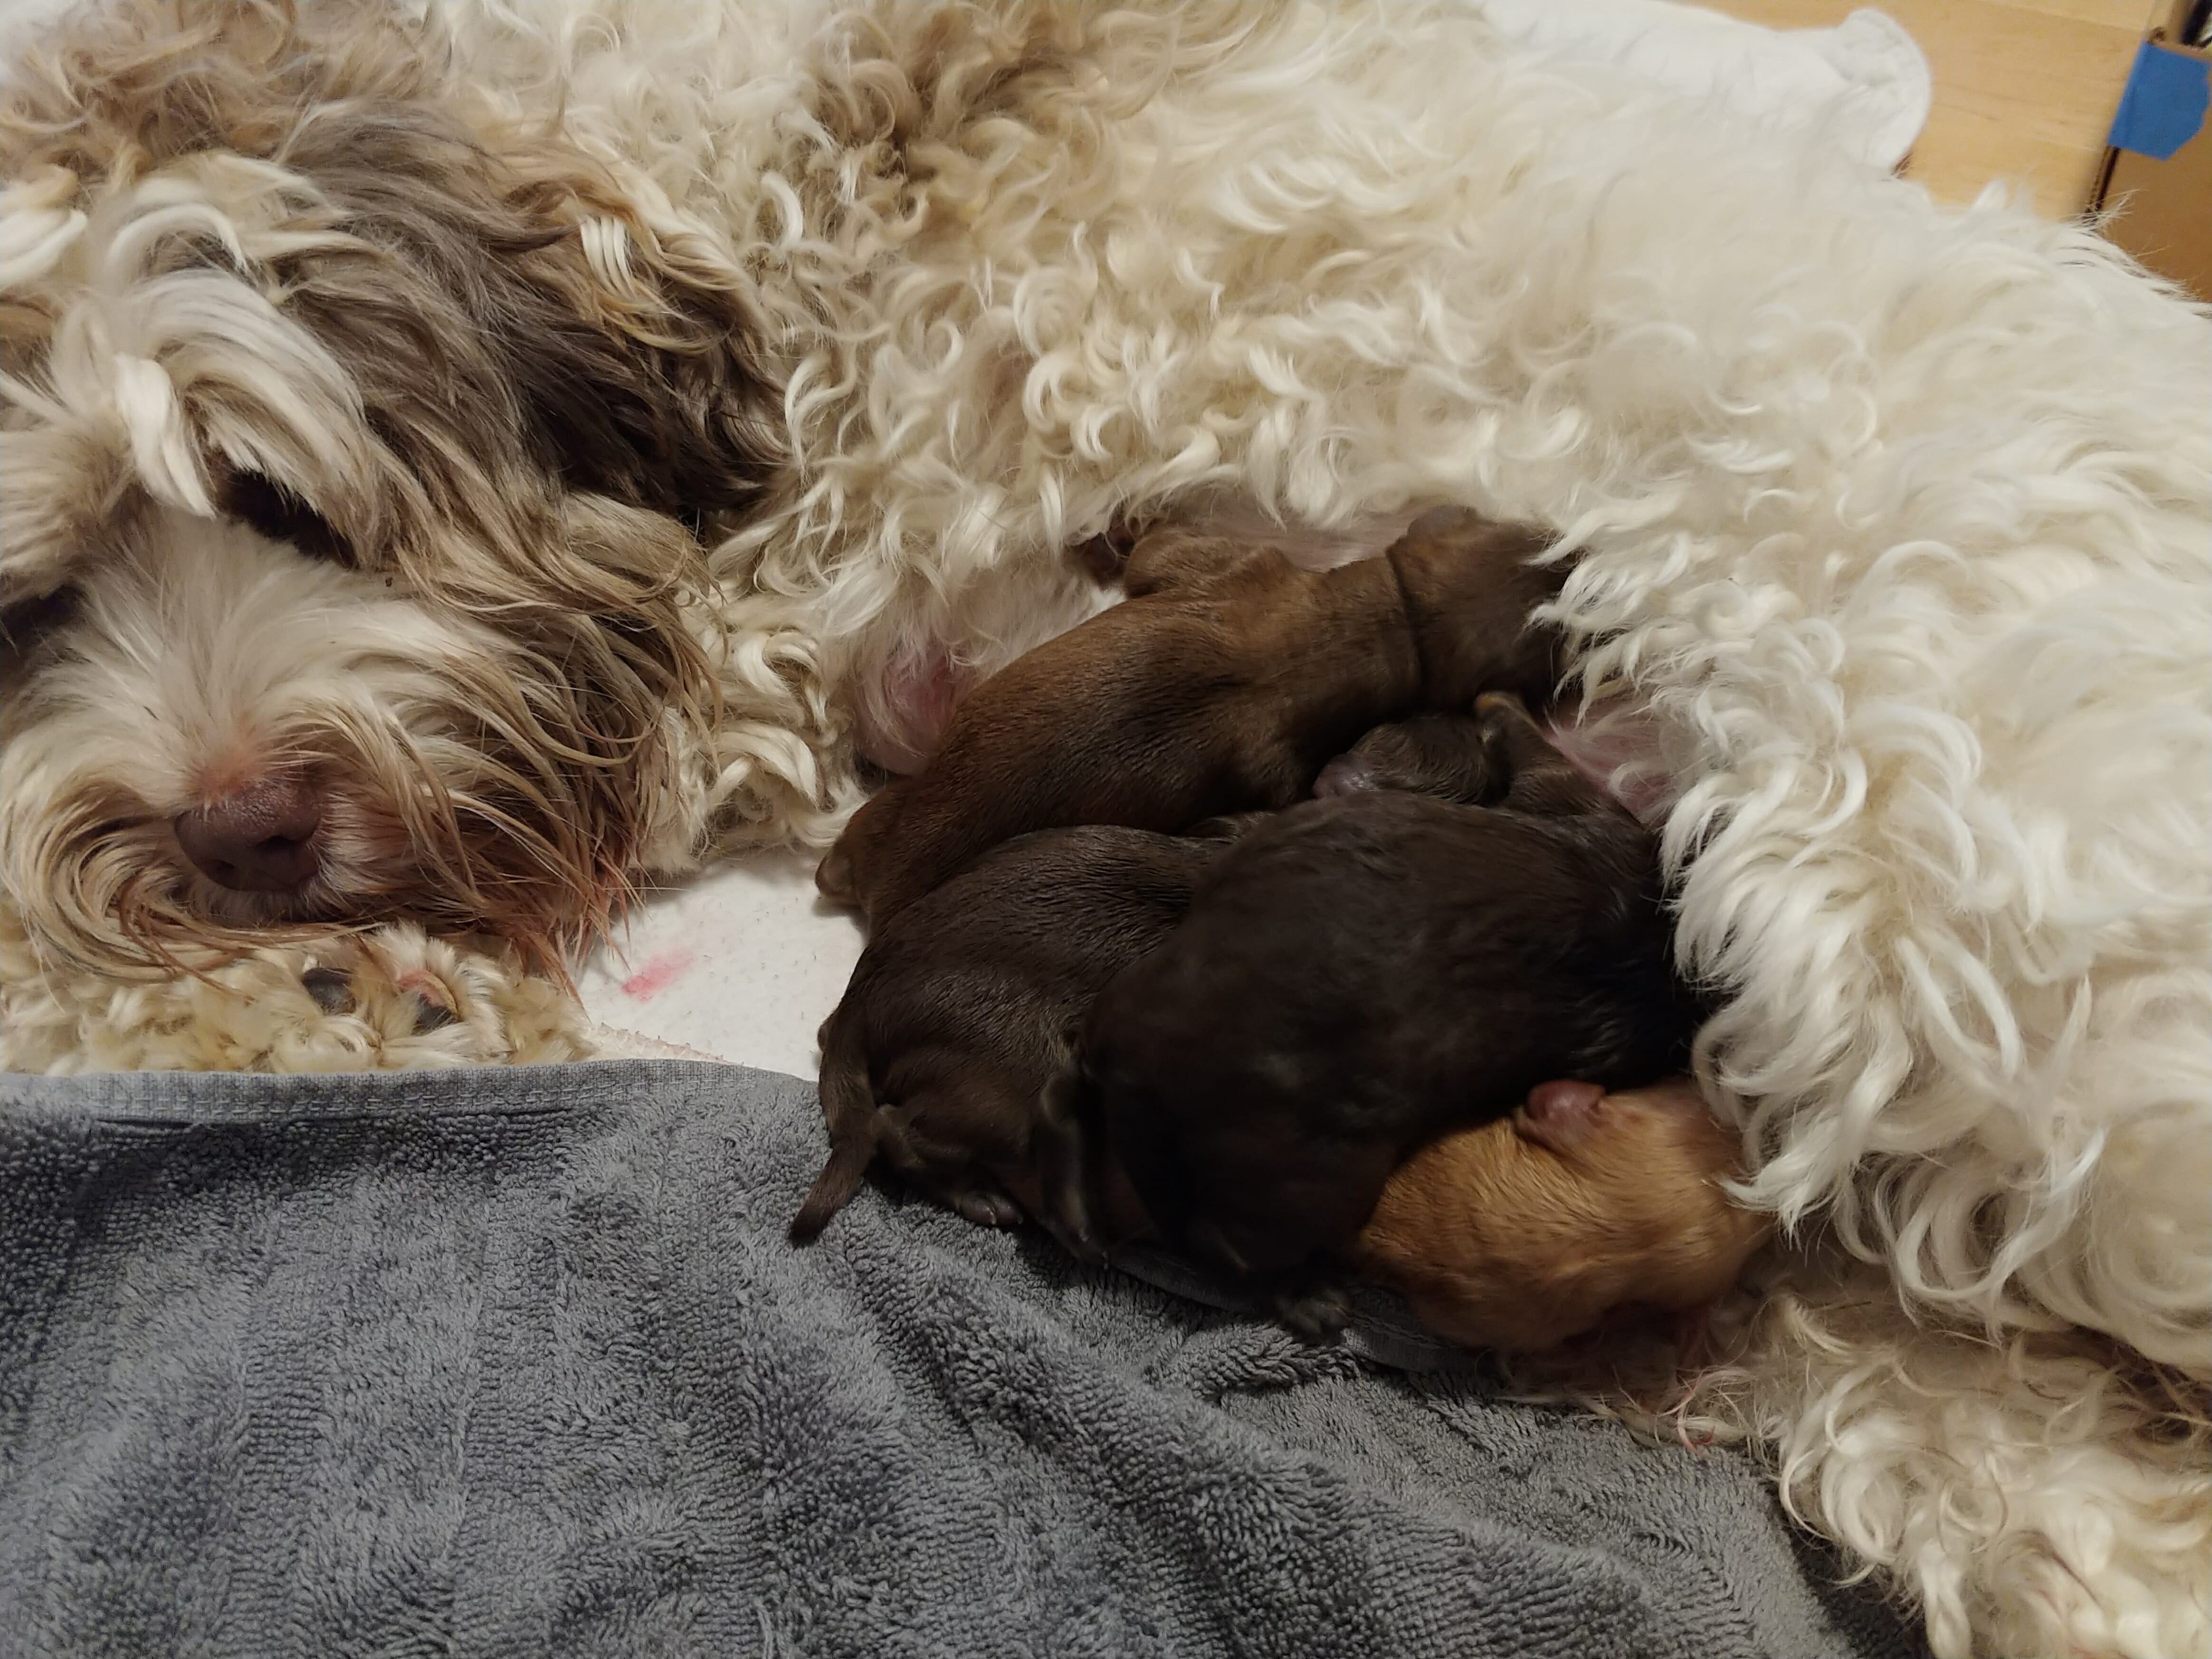 Four puppies, mostly dark chocolate snuggled into mom for a feed.